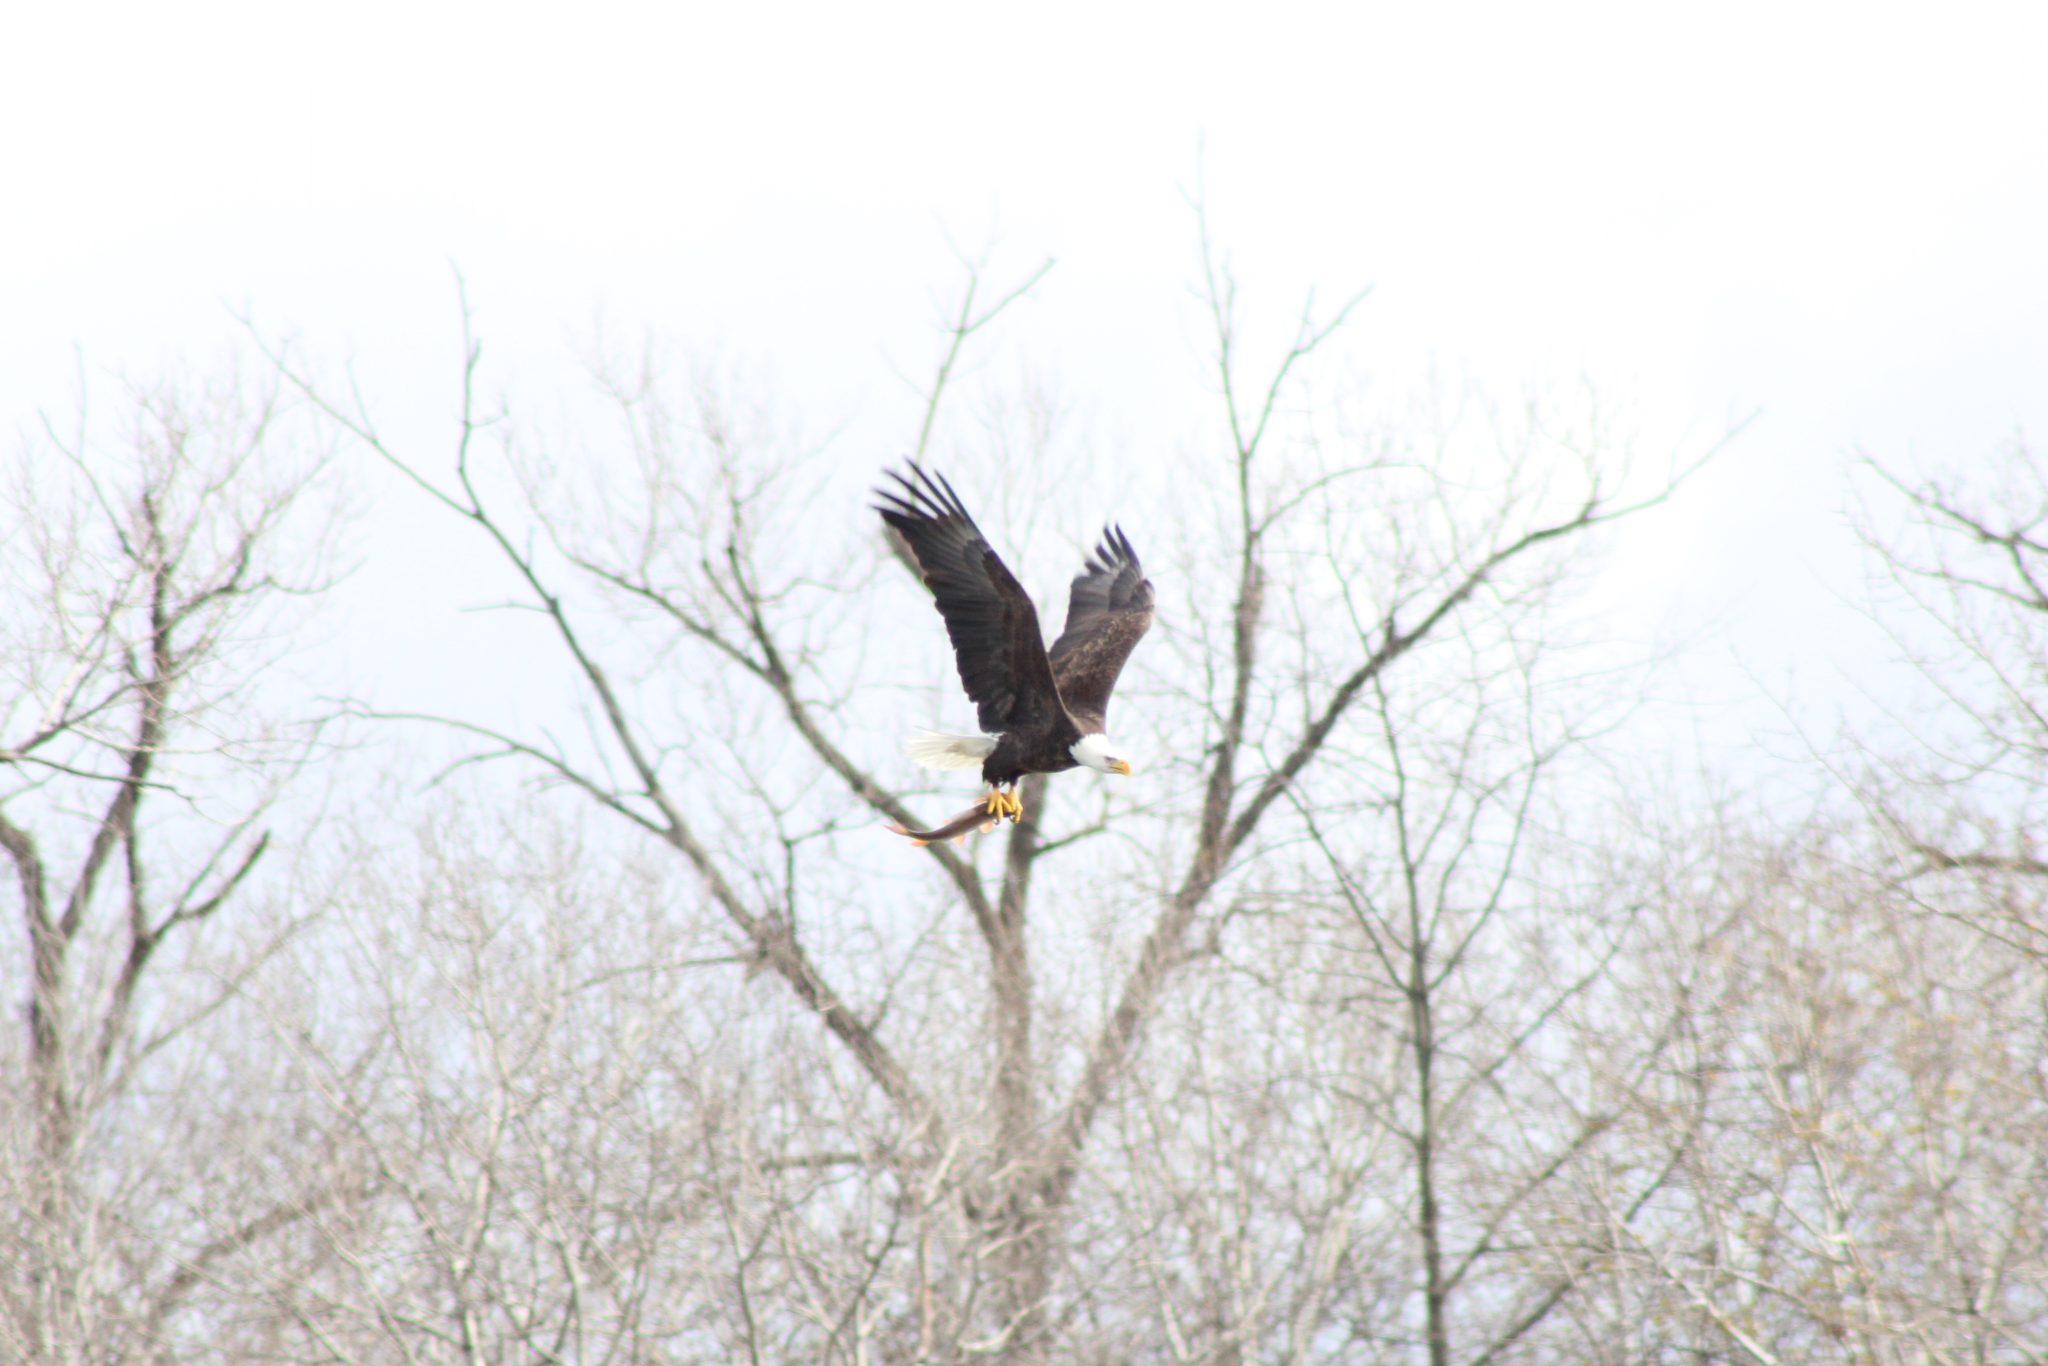 An eagle in flight with a fish in its talons. Tags: eagle, fish, Montezuma Wildlife Refuge, Seneca Falls, New York, USA